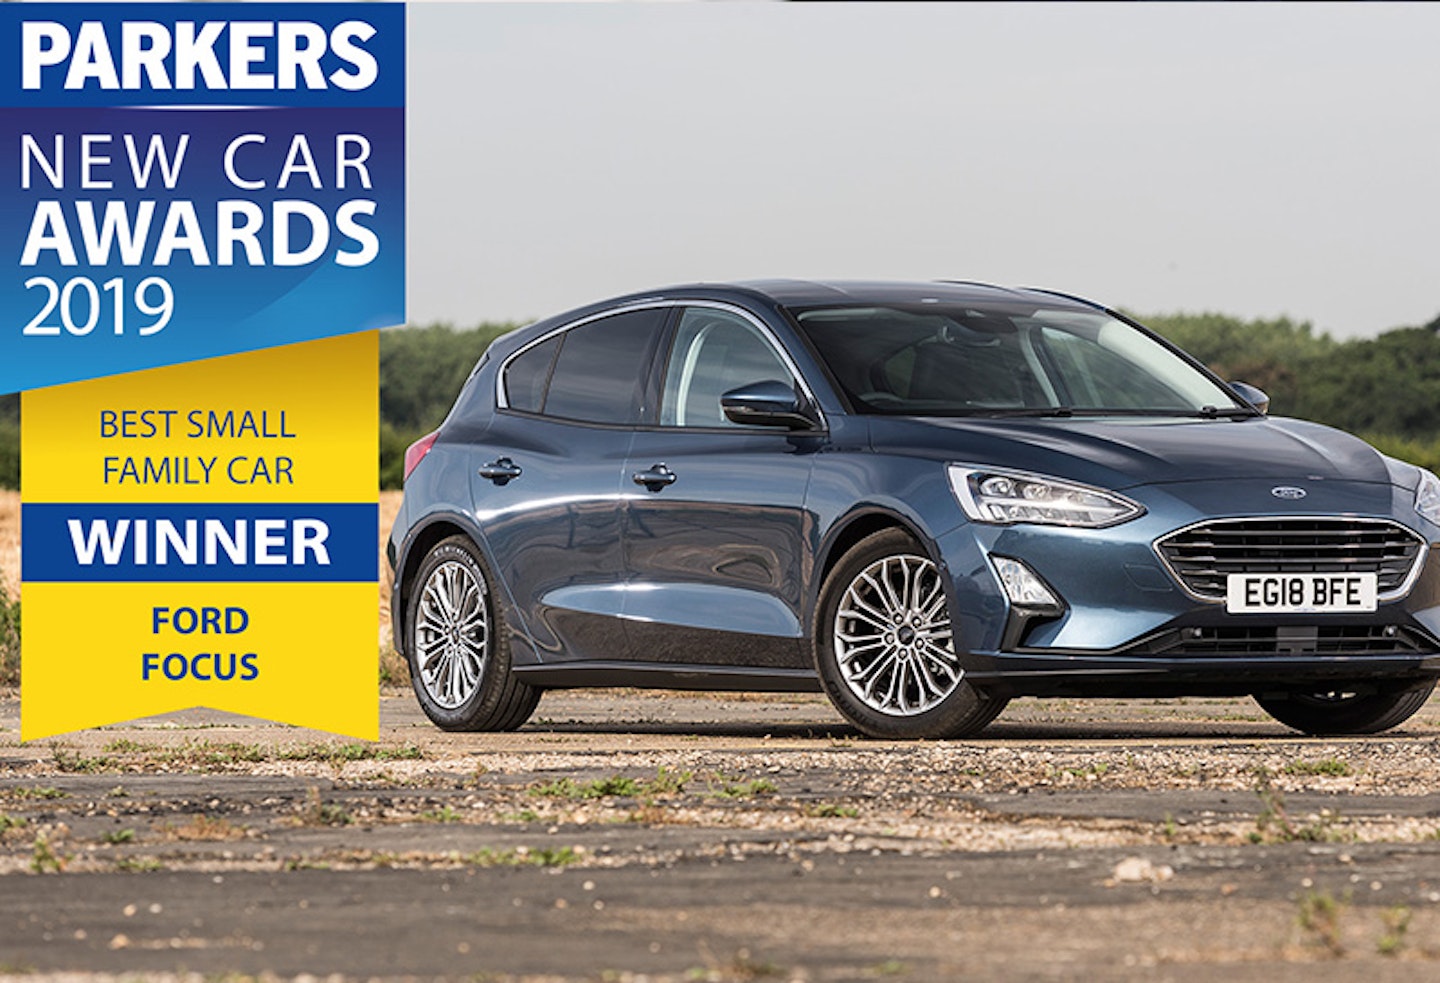 REVEALED: The winner of the best small family car of the year 2019